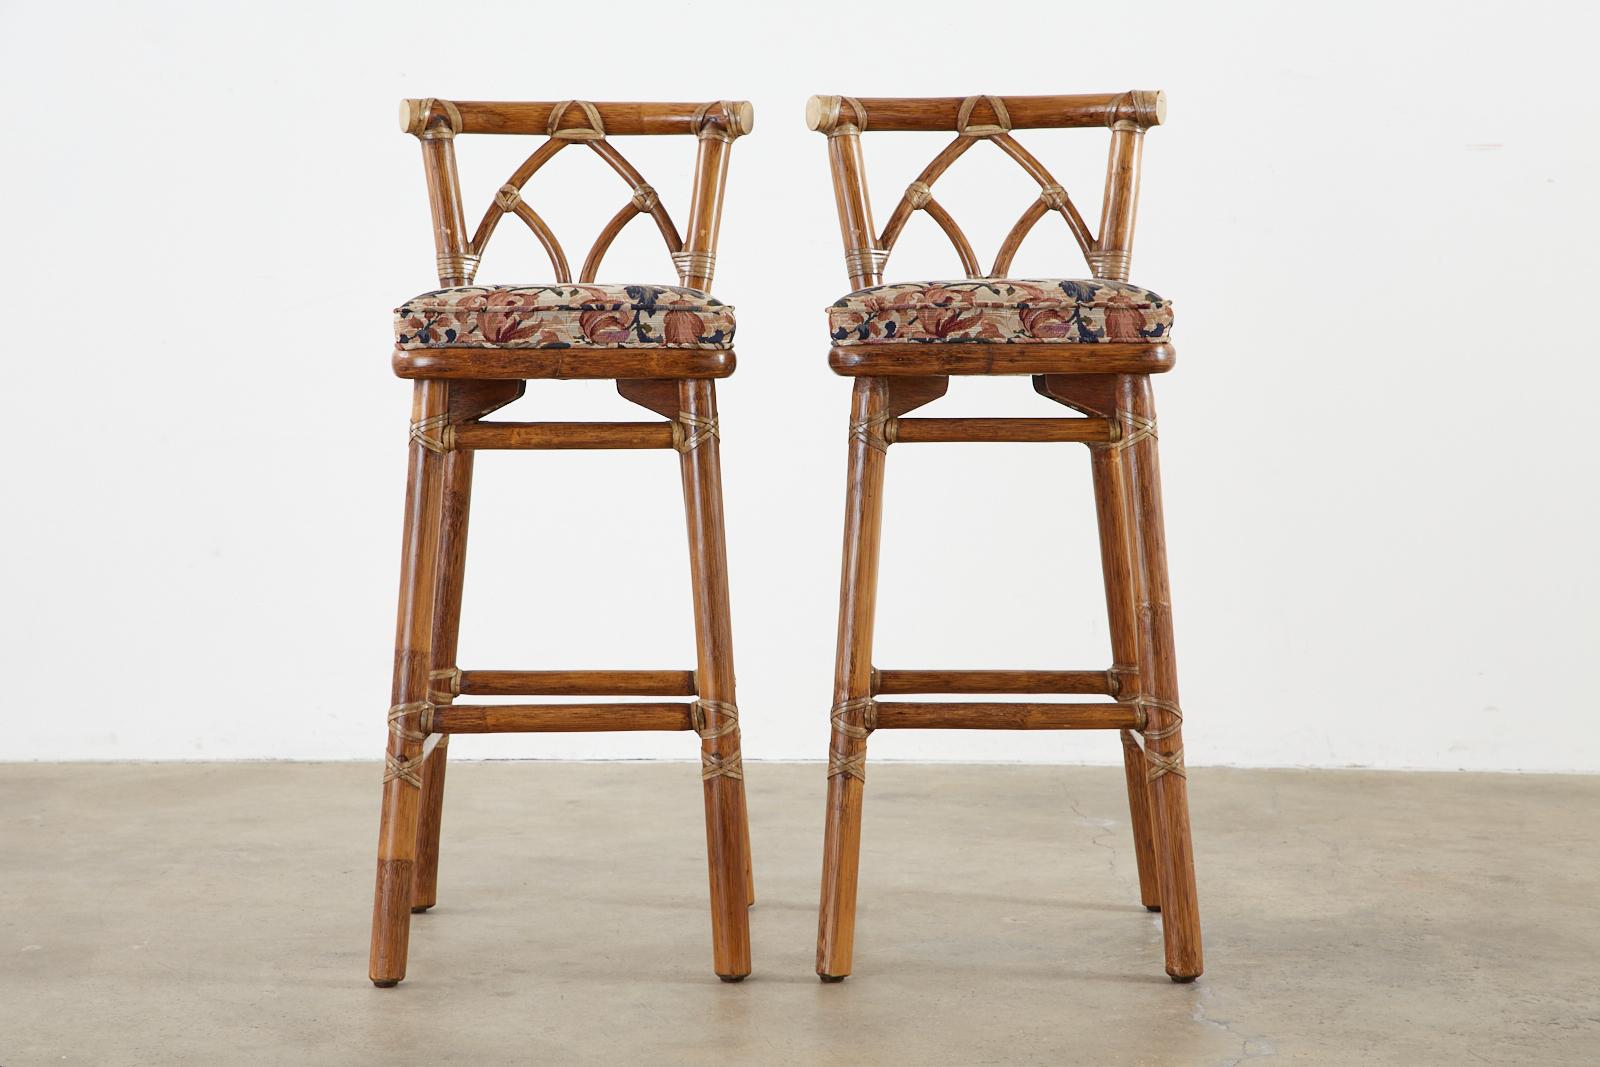 Genuine pair of bamboo rattan bar stools made in the California organic modern style by McGuire, San Francisco. The chairs feature a thick rattan pole frame lashed together with leather rawhide laces. Decorated with an arch motif back splat and